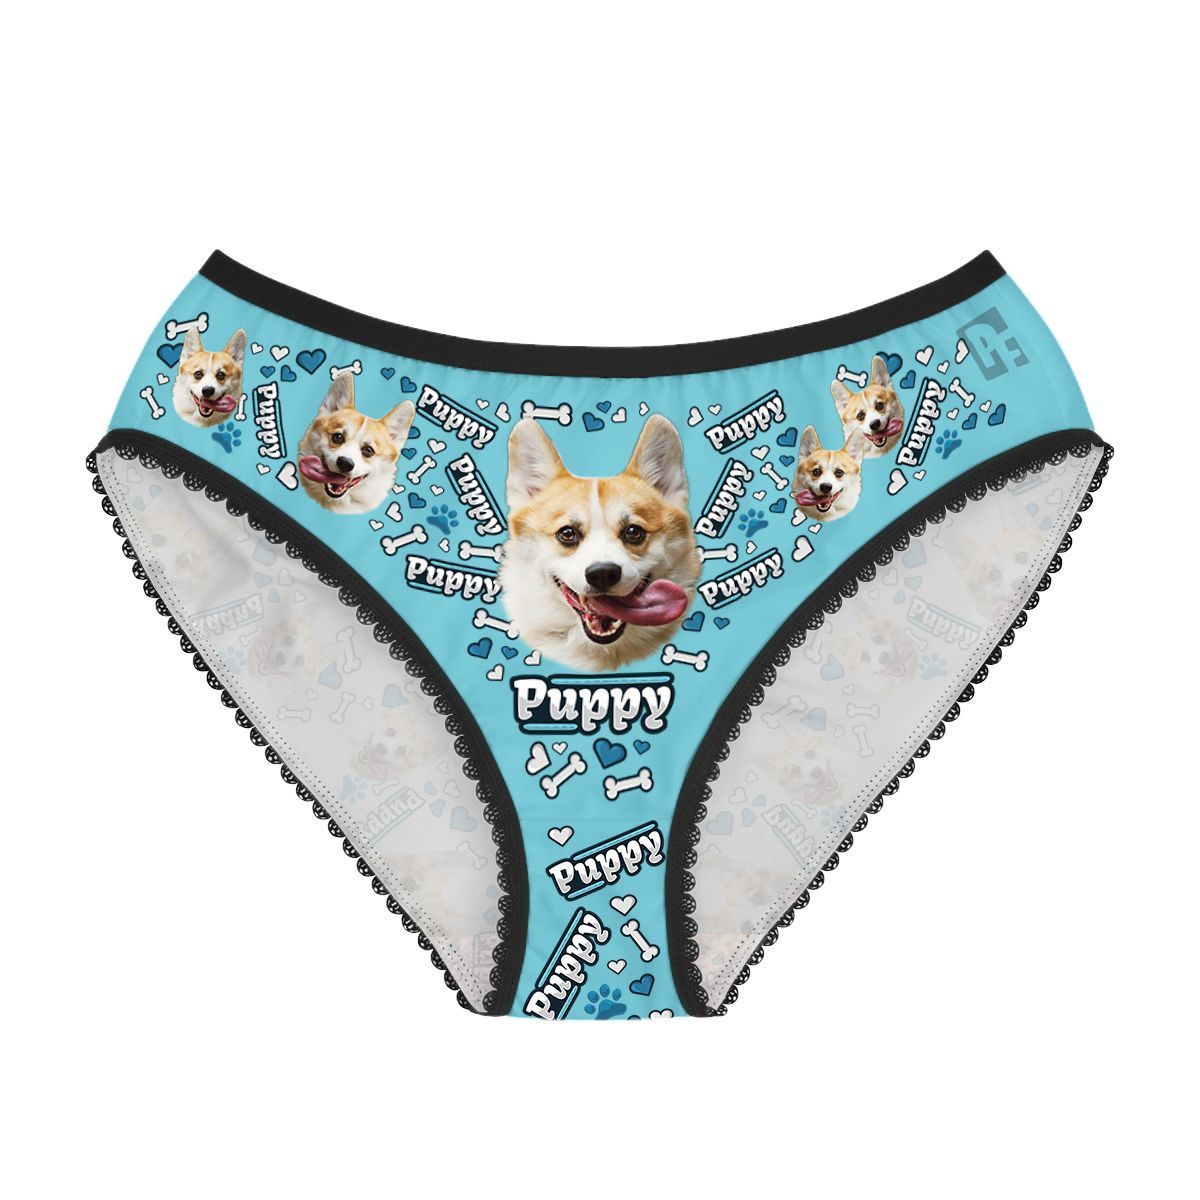 Blue Puppy women's underwear briefs personalized with photo printed on them